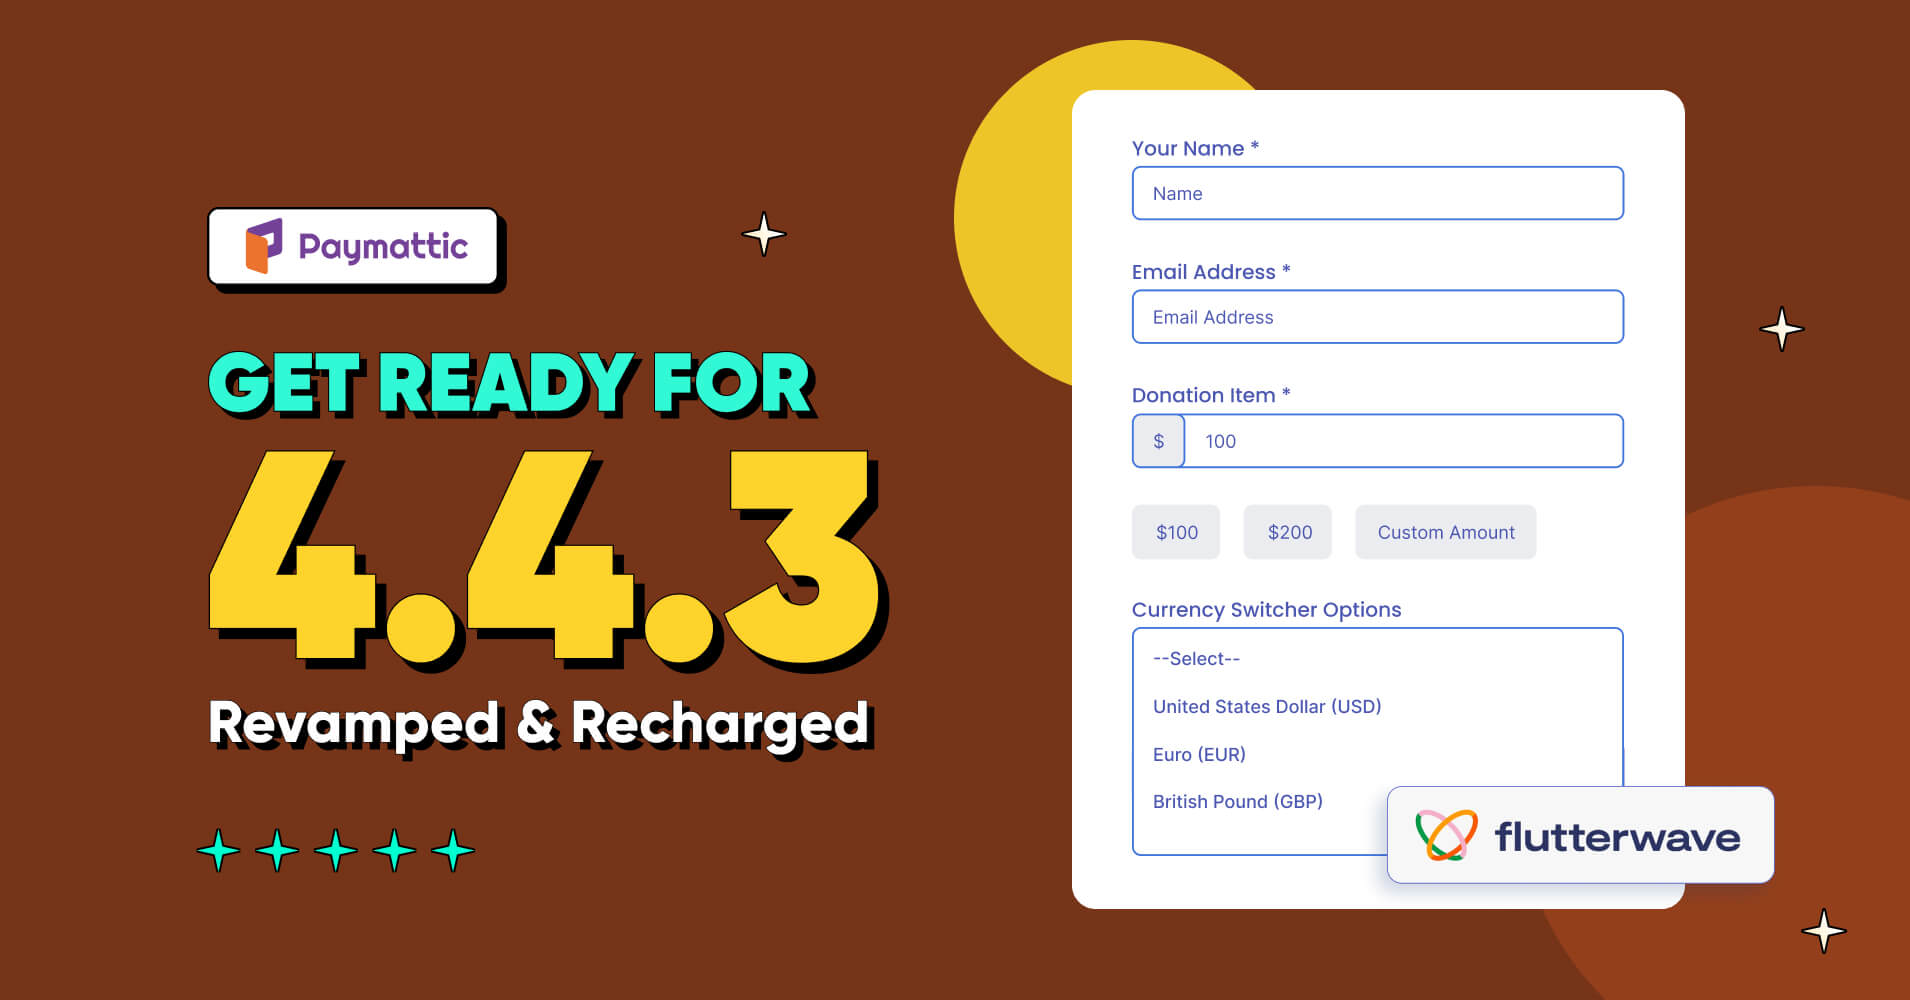 Get Ready for Paymattic 4.4.3 - Revamped & Recharged